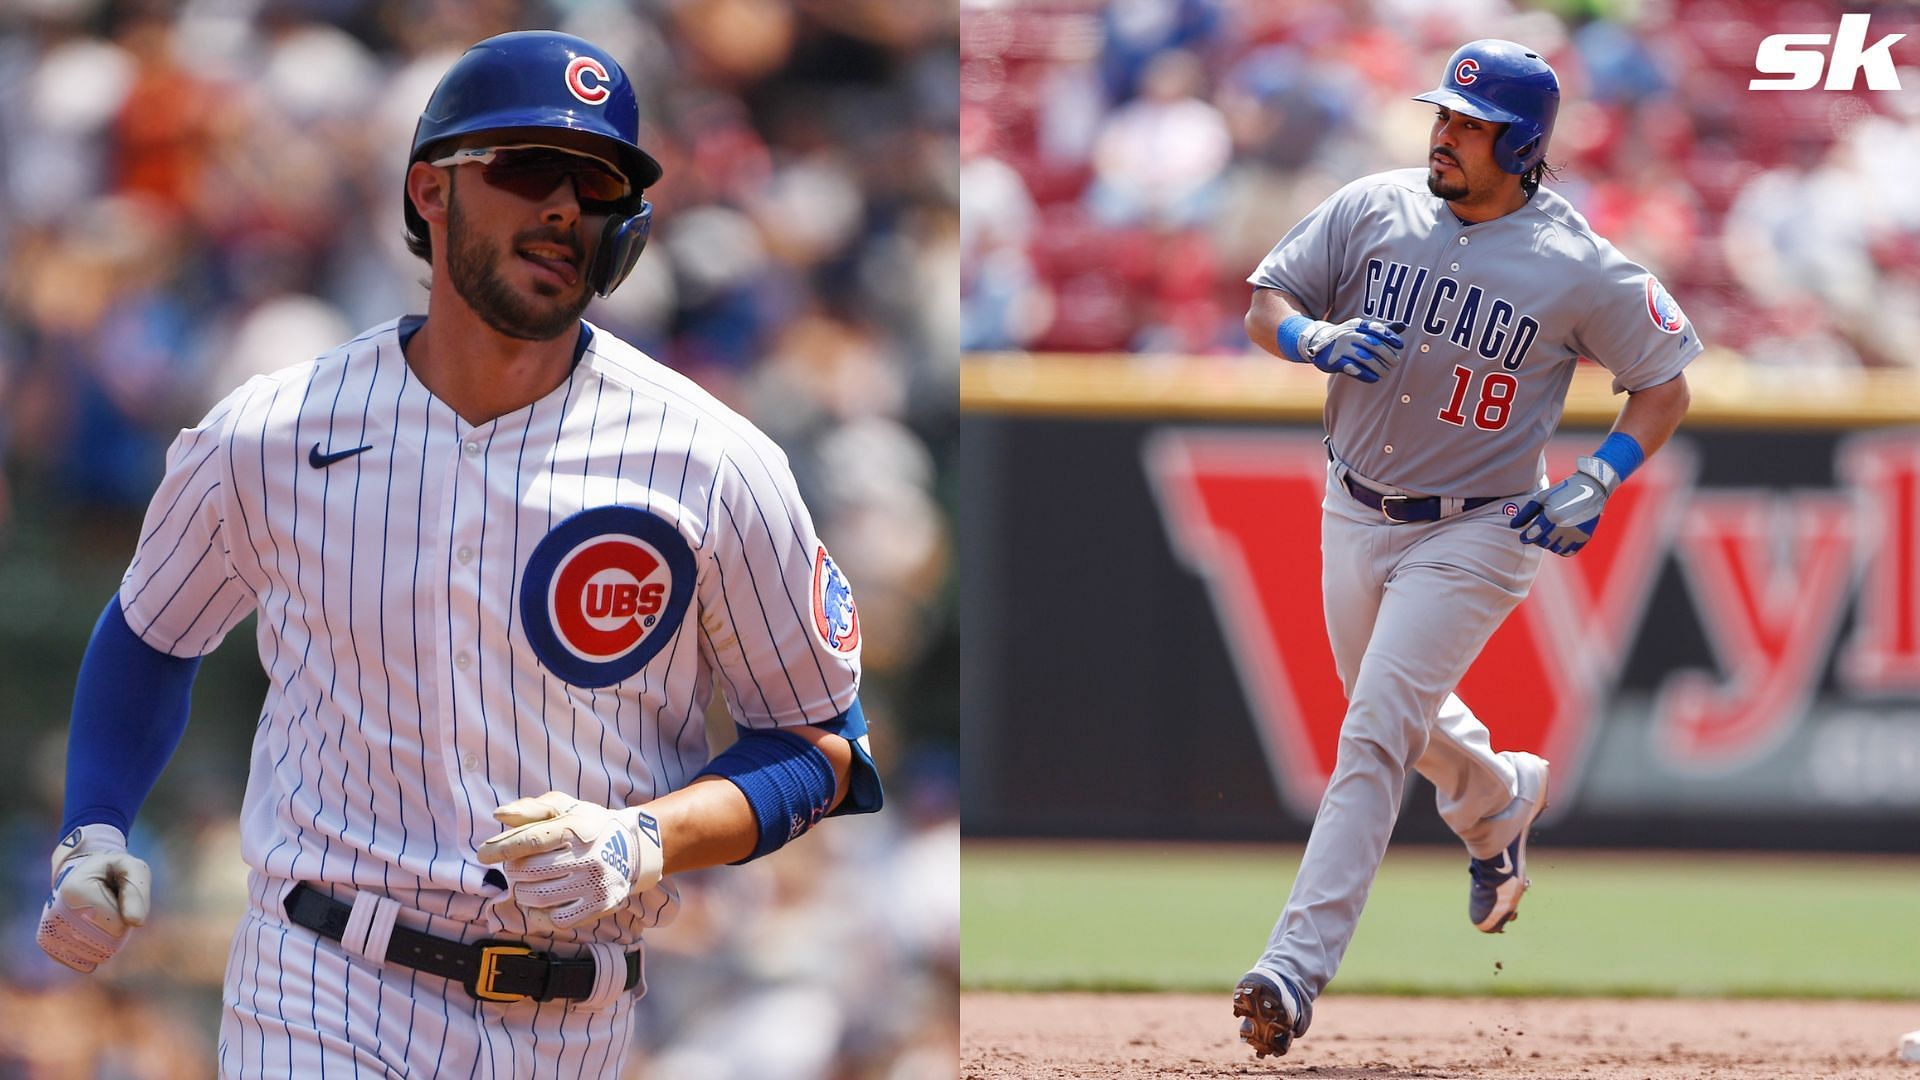 Cubs 3B Kris Bryant wins NL Rookie of the Year unanimously